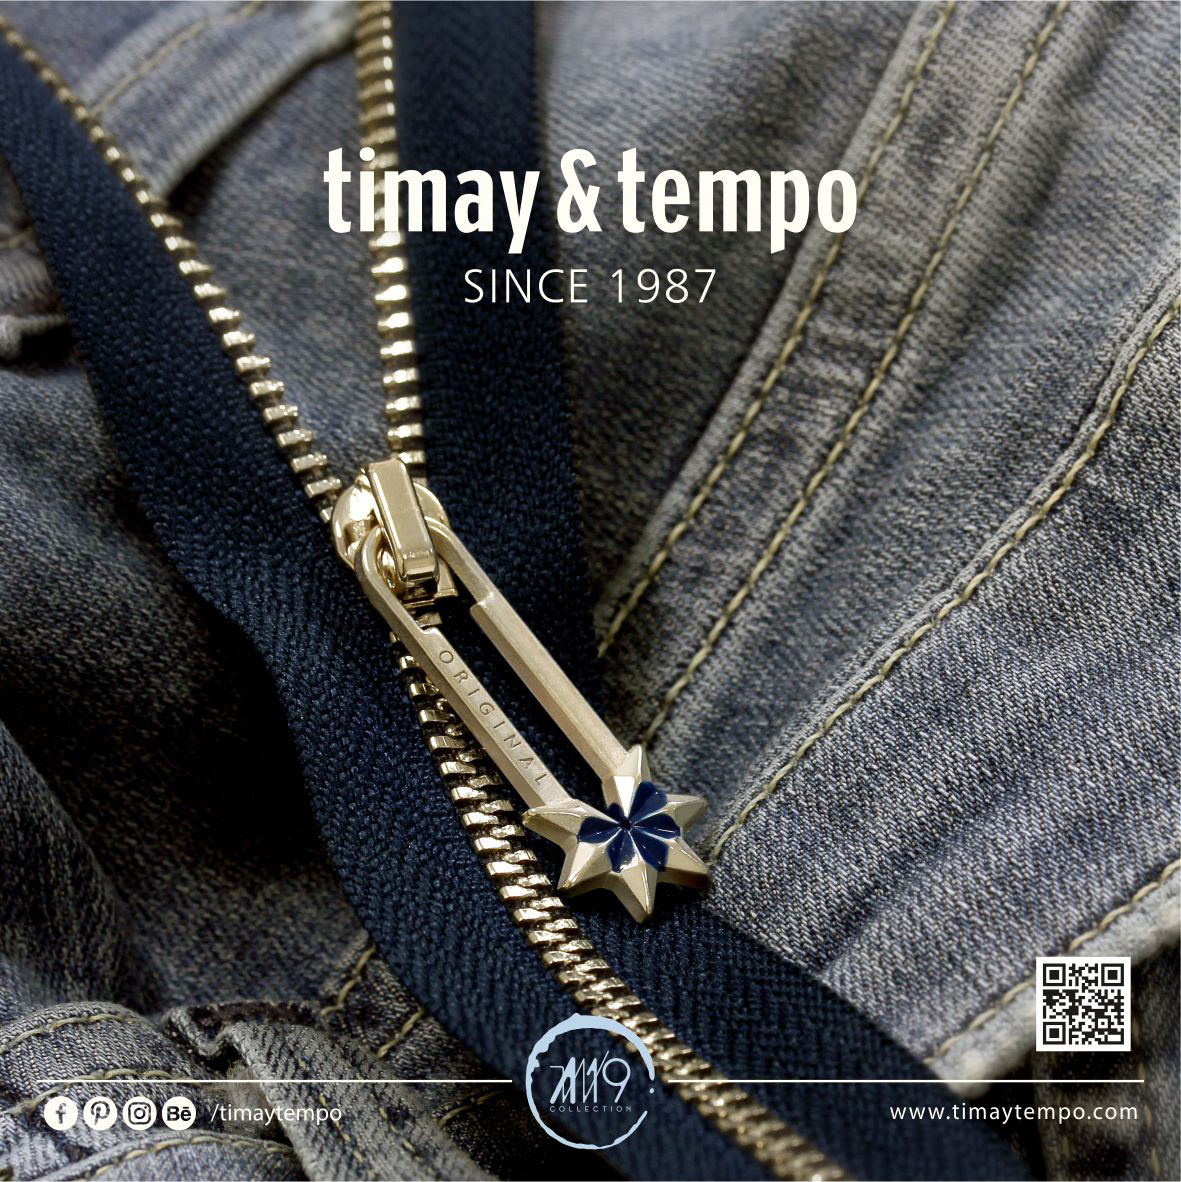 timaytempo timay&tempo metal Zipper accessories button Denim jeans